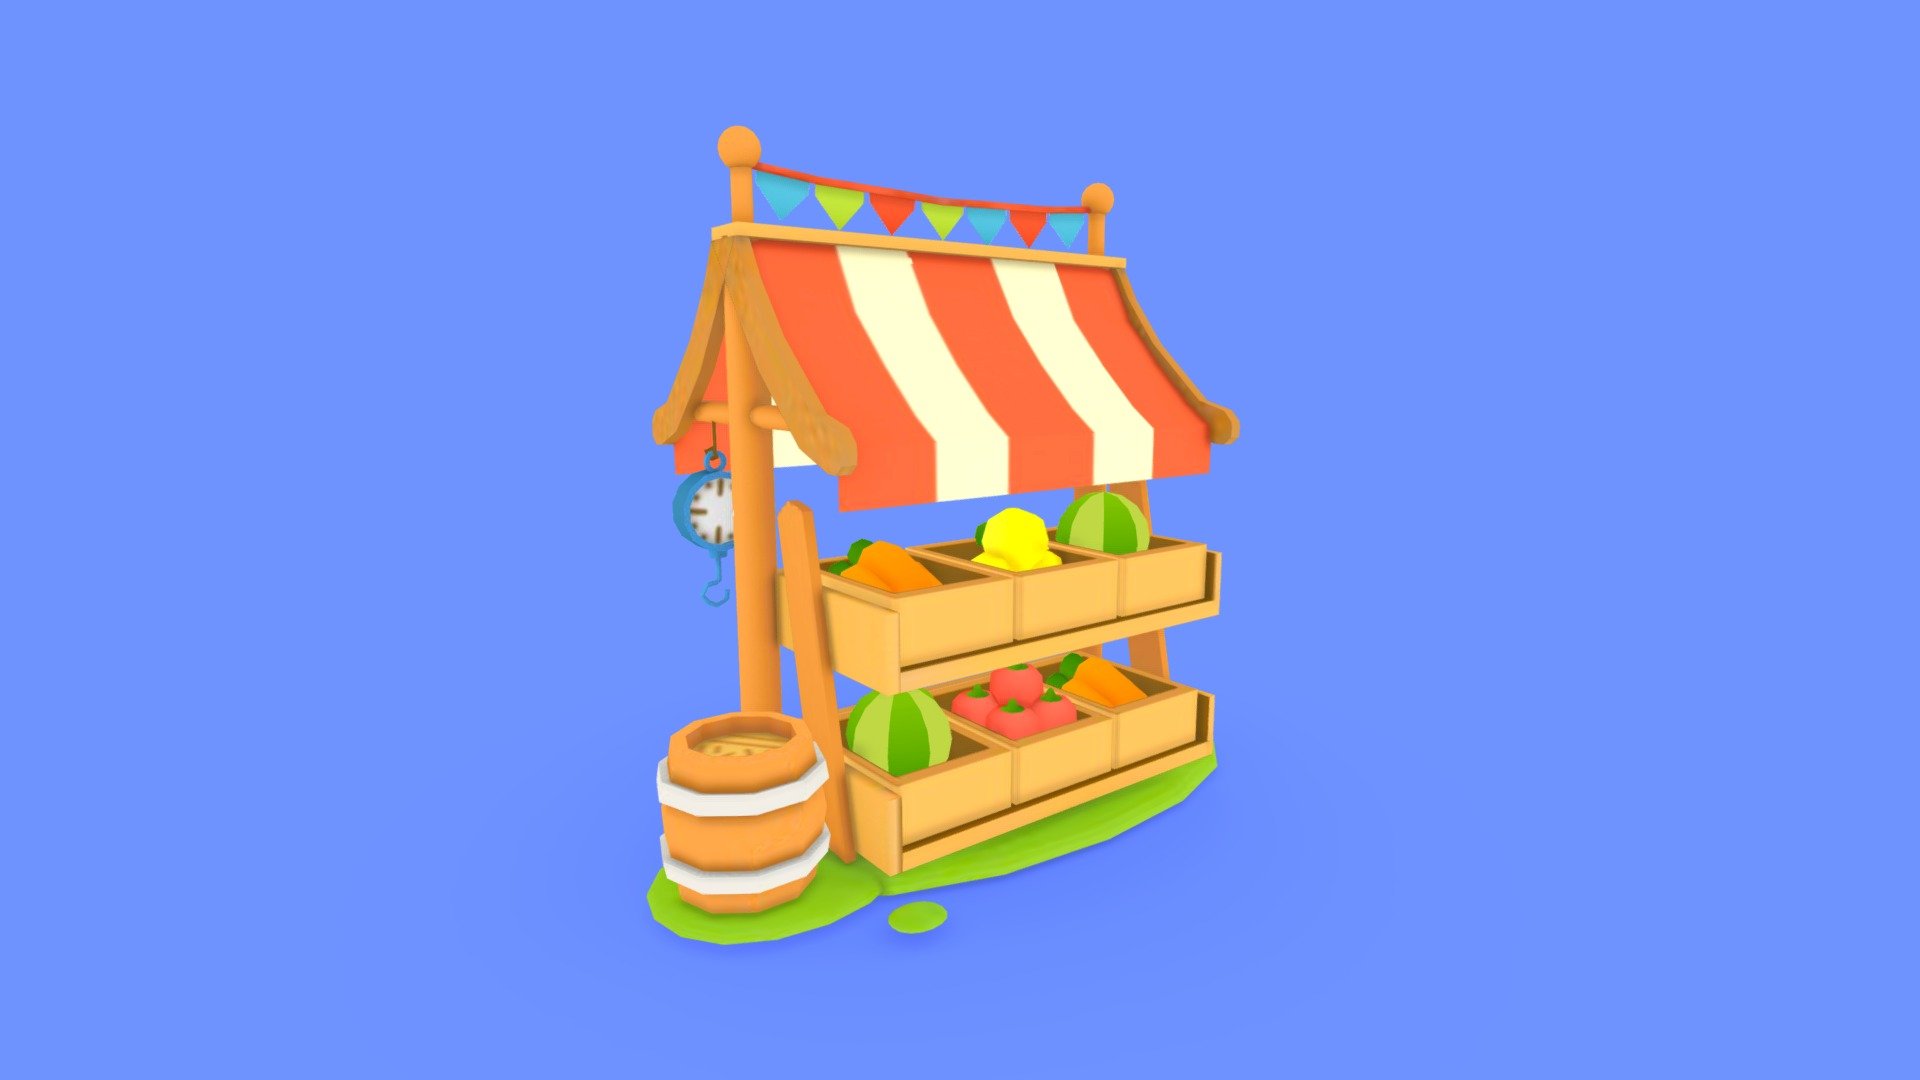 Shop with fresh vegetables and fruits.
By reference https://www.behance.net/gallery/74157009/Market-Square/modules/431346151 - Vegetables shop - Download Free 3D model by adamaysils 3d model